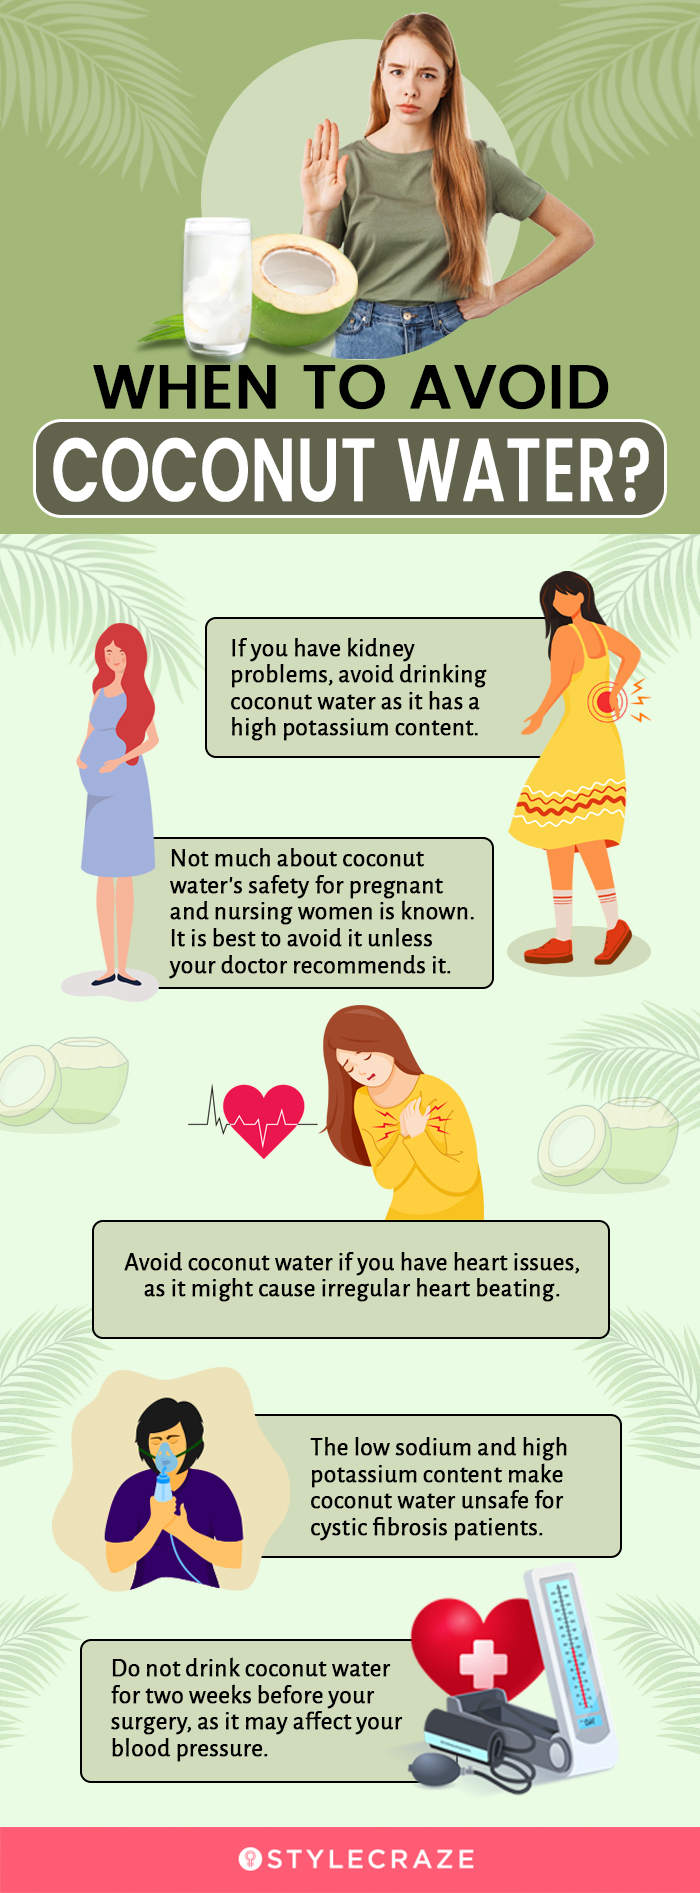 when to avoid coconut water (infographic)